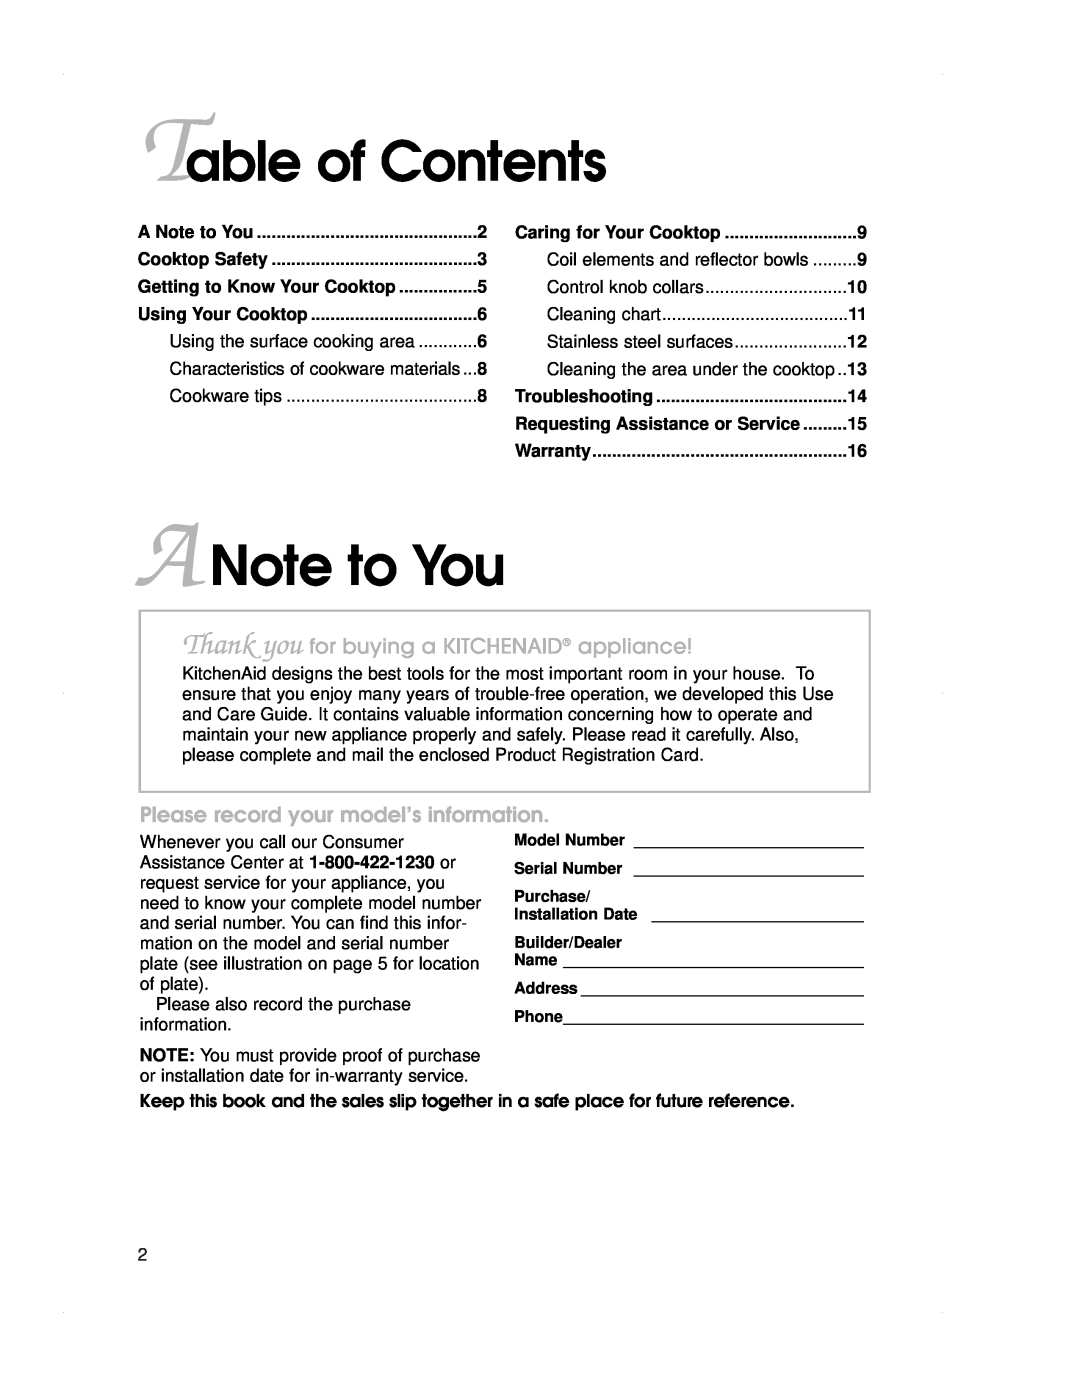 KitchenAid KECS161, KECS100 warranty Table of Contents, A Note to You, Thank you for buying a KITCHENAID appliance 